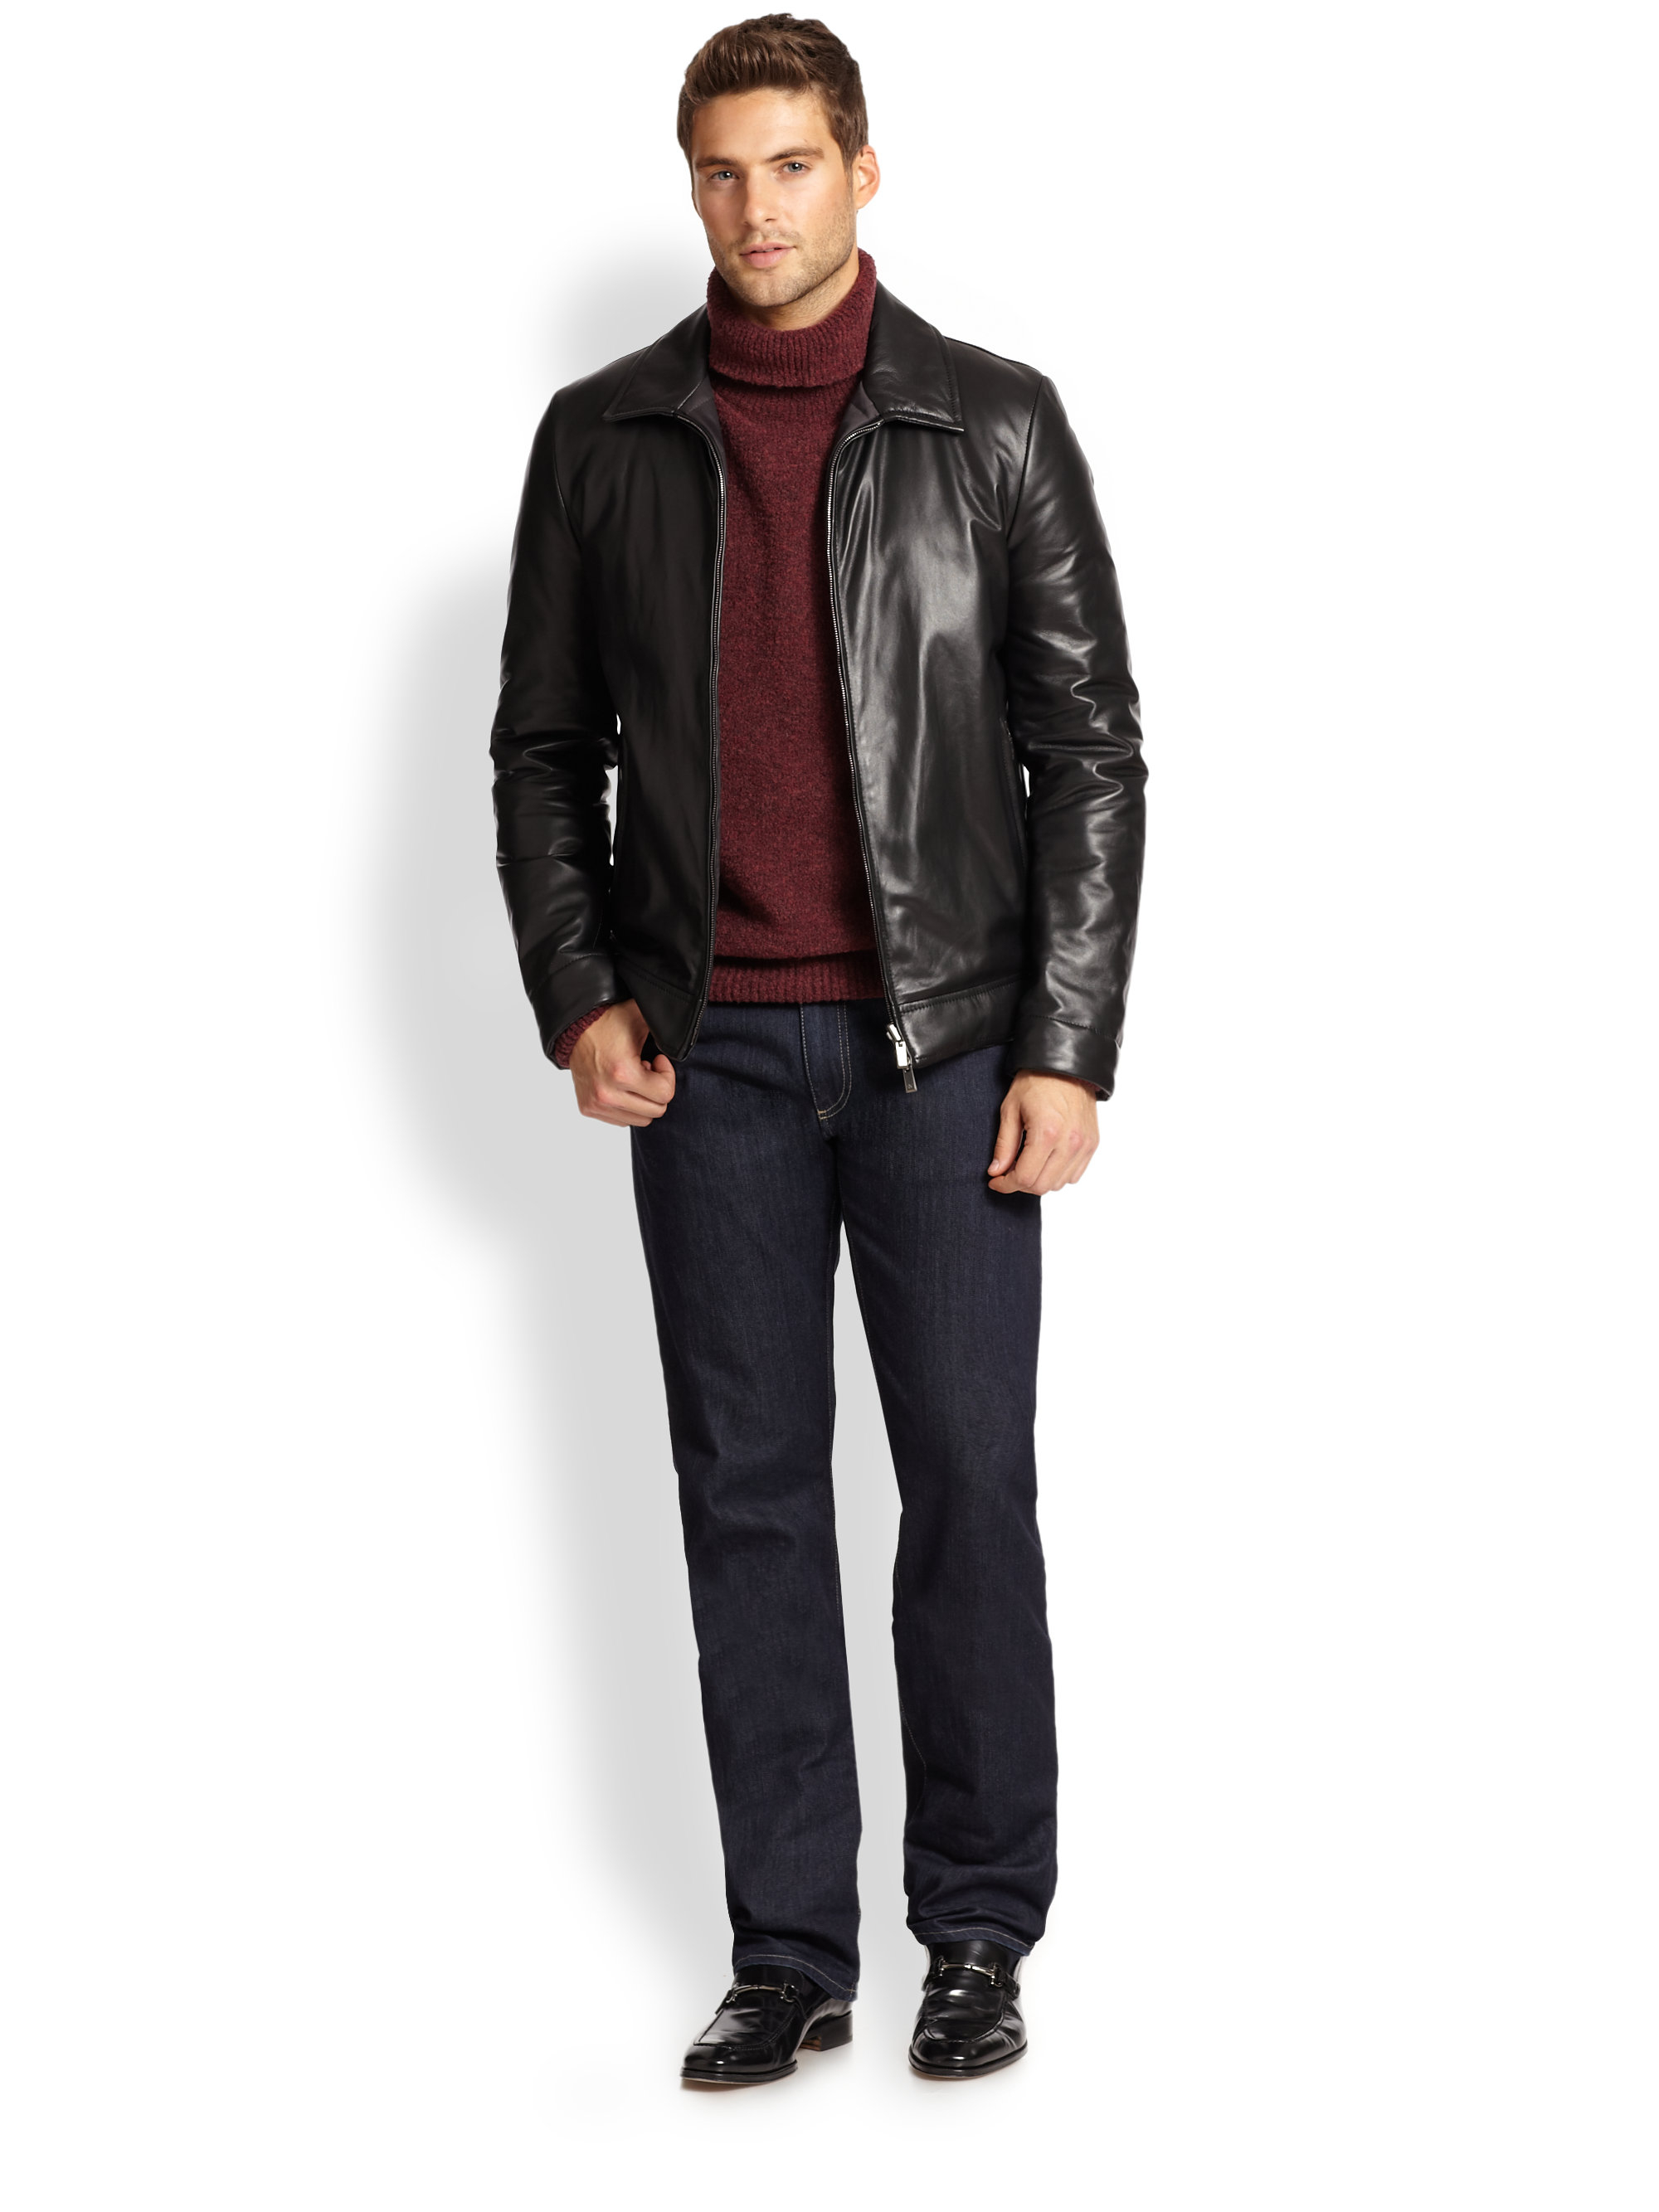 Lyst - Canali Leather Jacket in Black for Men